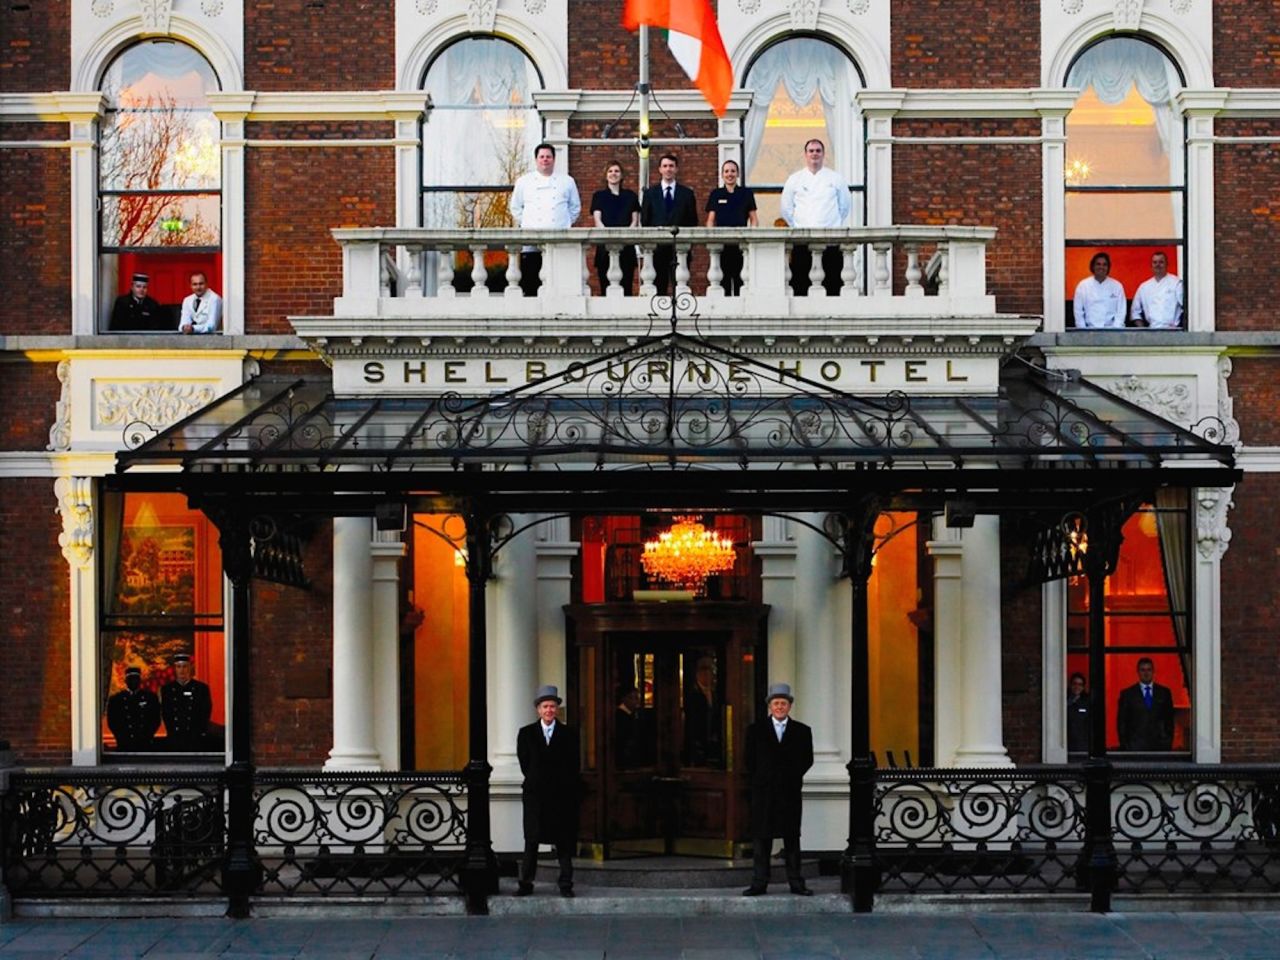 Built in 1824 and located on St. Stephen's Green in the heart of Dublin, the lavish Shelbourne Hotel is Ireland's oldest and most historic hotel. 